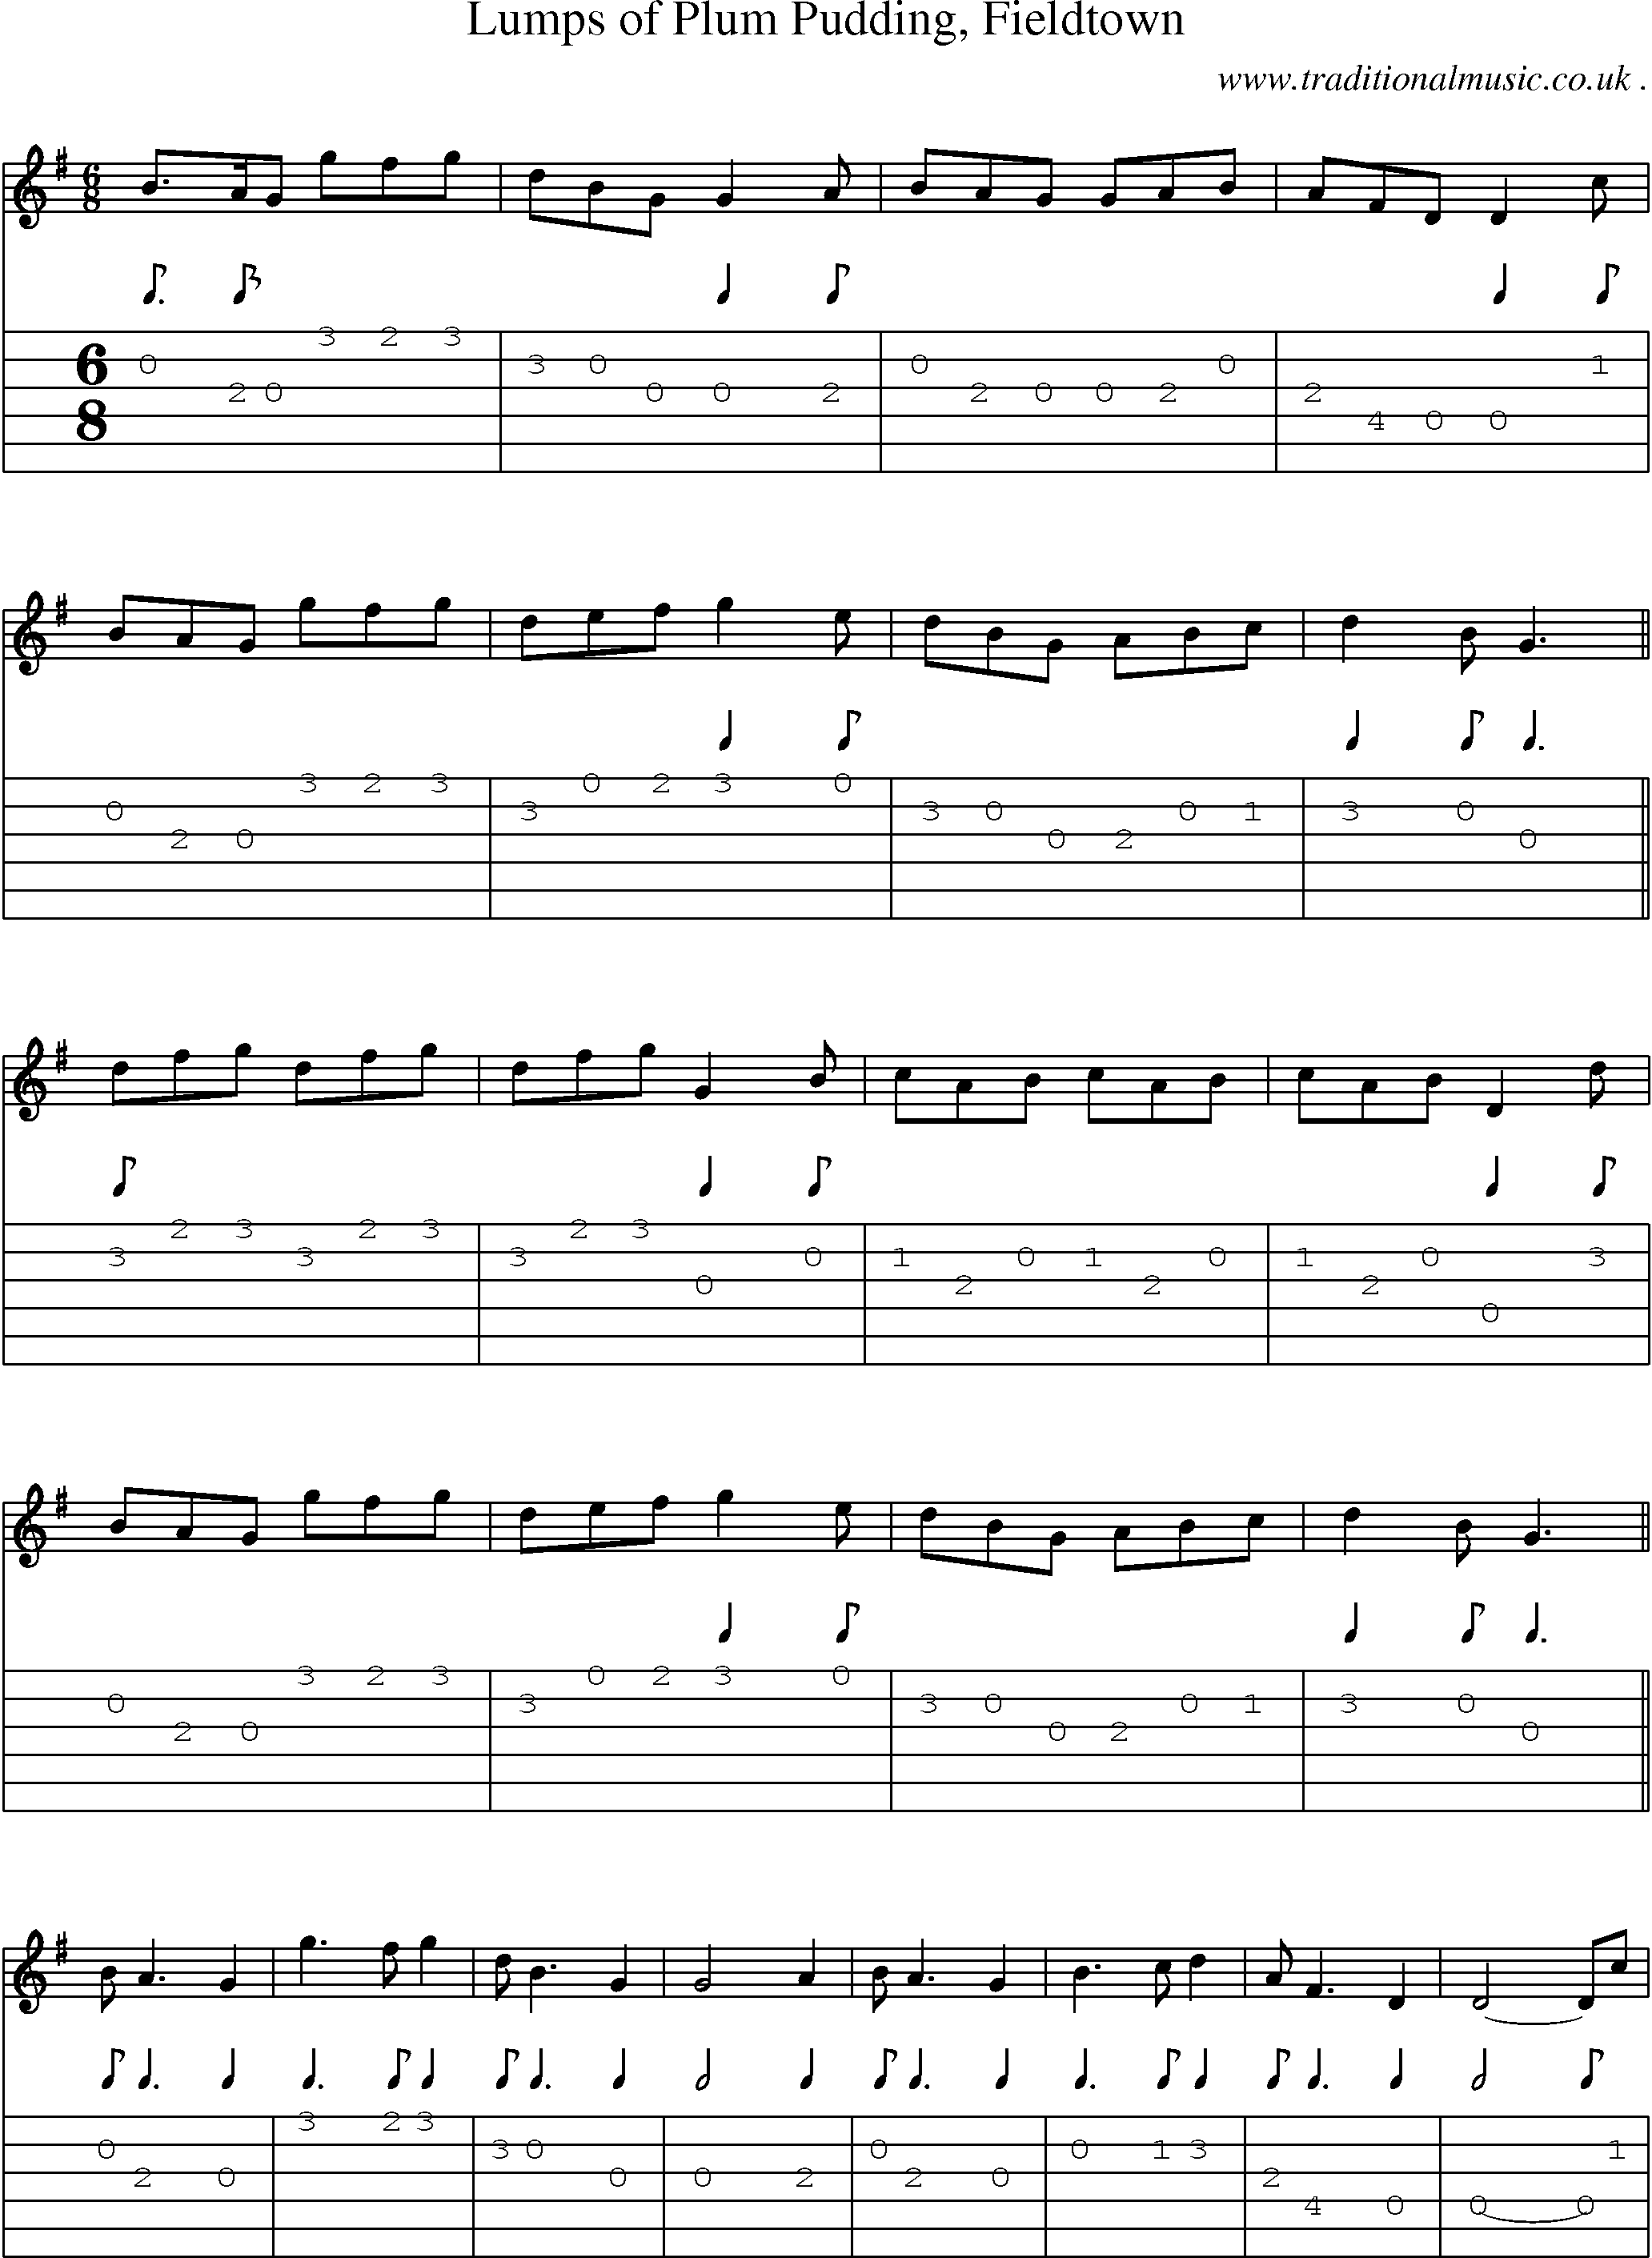 Sheet-Music and Guitar Tabs for Lumps Of Plum Pudding Fieldtown